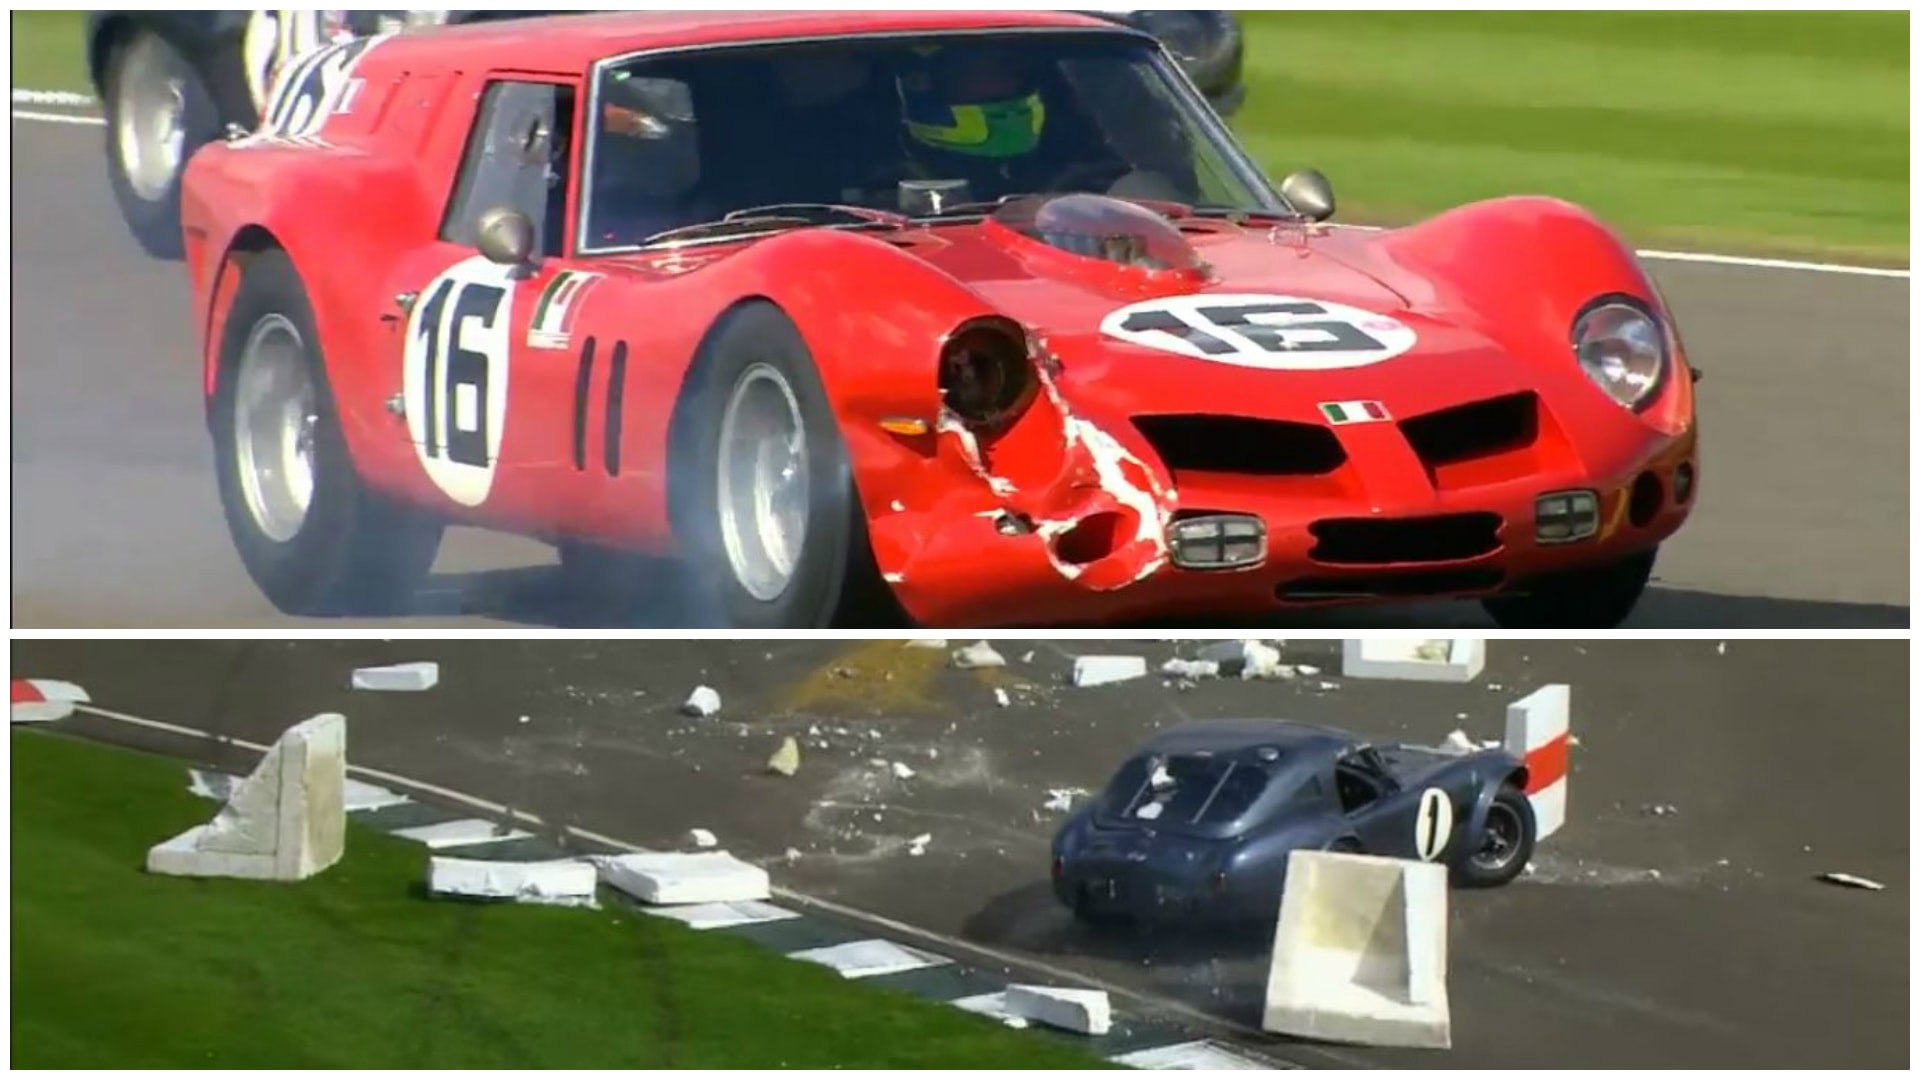 18m-ferrari-breadvan-crashes-and-keeps-racing-27m-cobra-smashes-into-barrier-at-goodwood-revival-video-99855_1.jpg